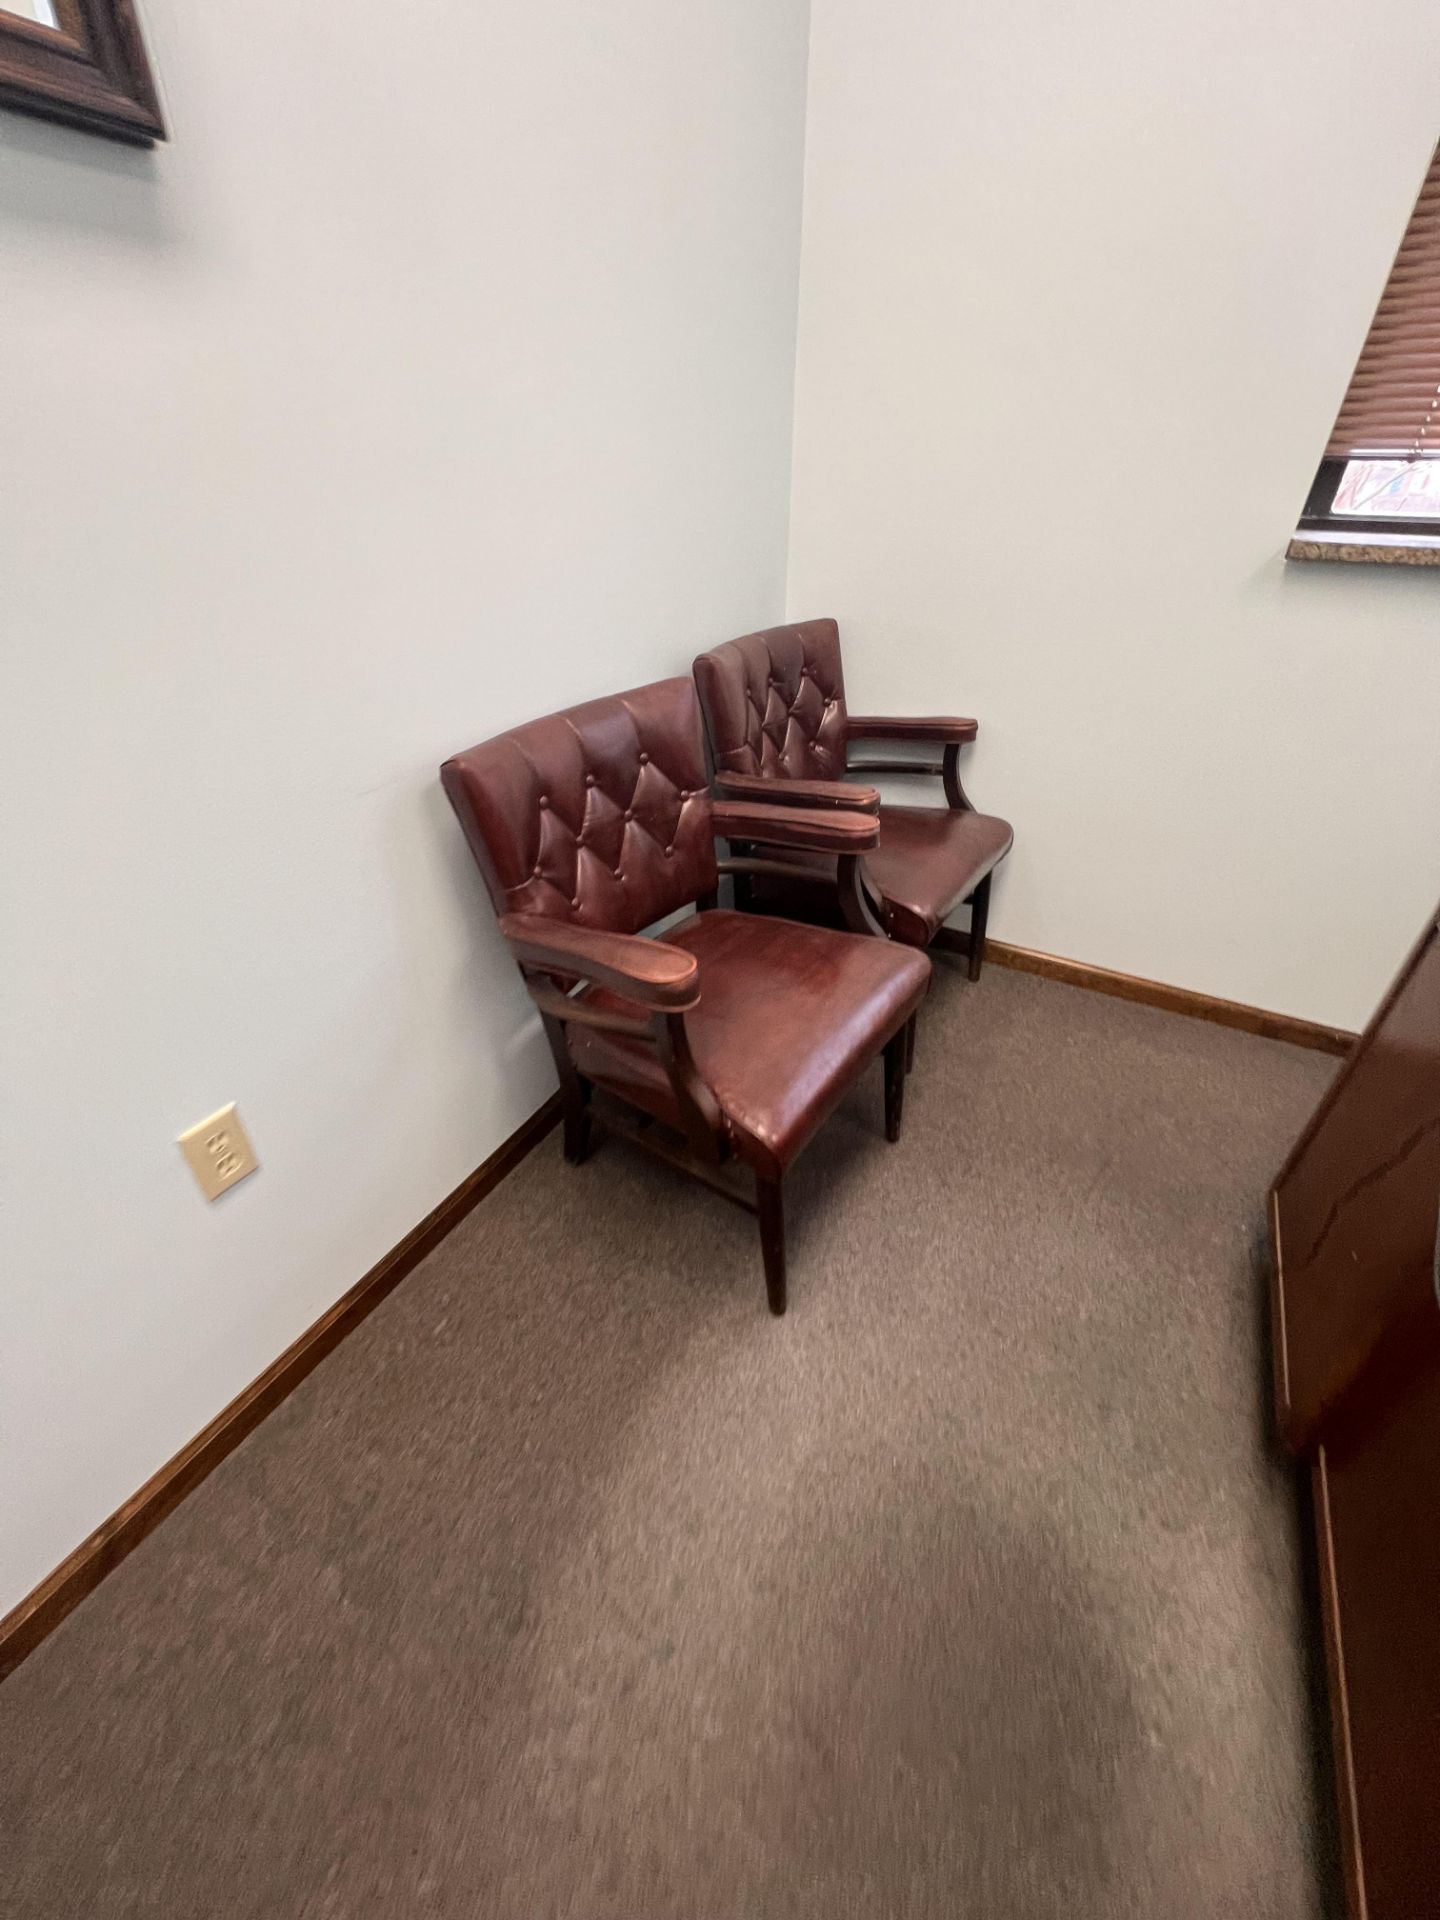 CONTENTS OF OFFICE, INCLUDES WOOD DESK, CHAIRS, 2-DOOR FILE CABINET, DOES NOT INCLUDE COMPUTERS OR - Bild 2 aus 4